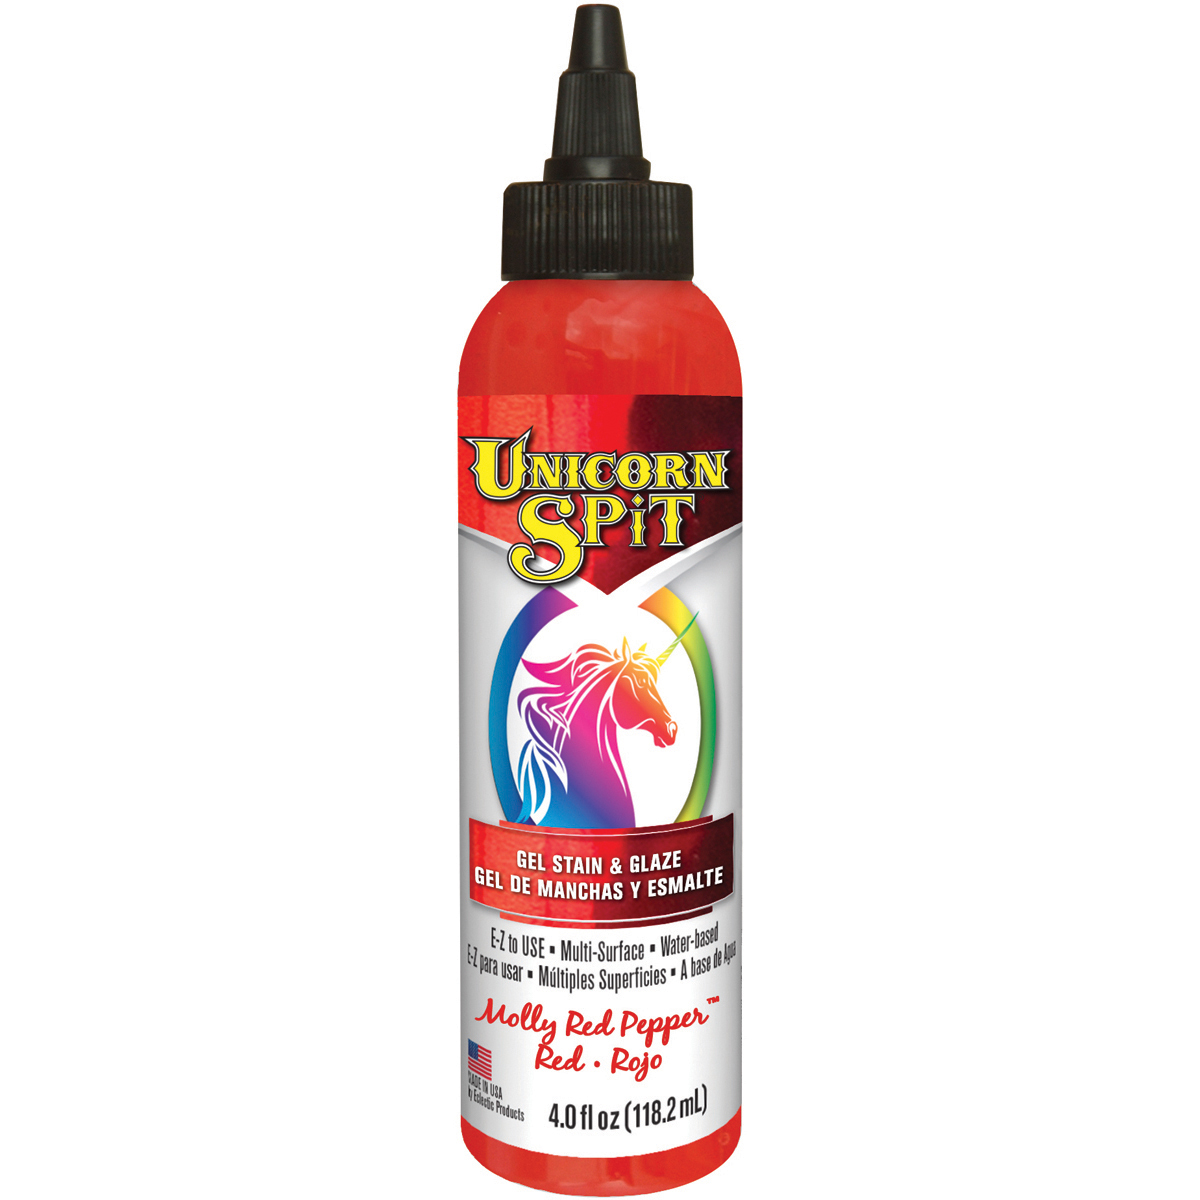 5770-002 Unicorn Spit Wood Stain And Glaze - Molly Red Pepper